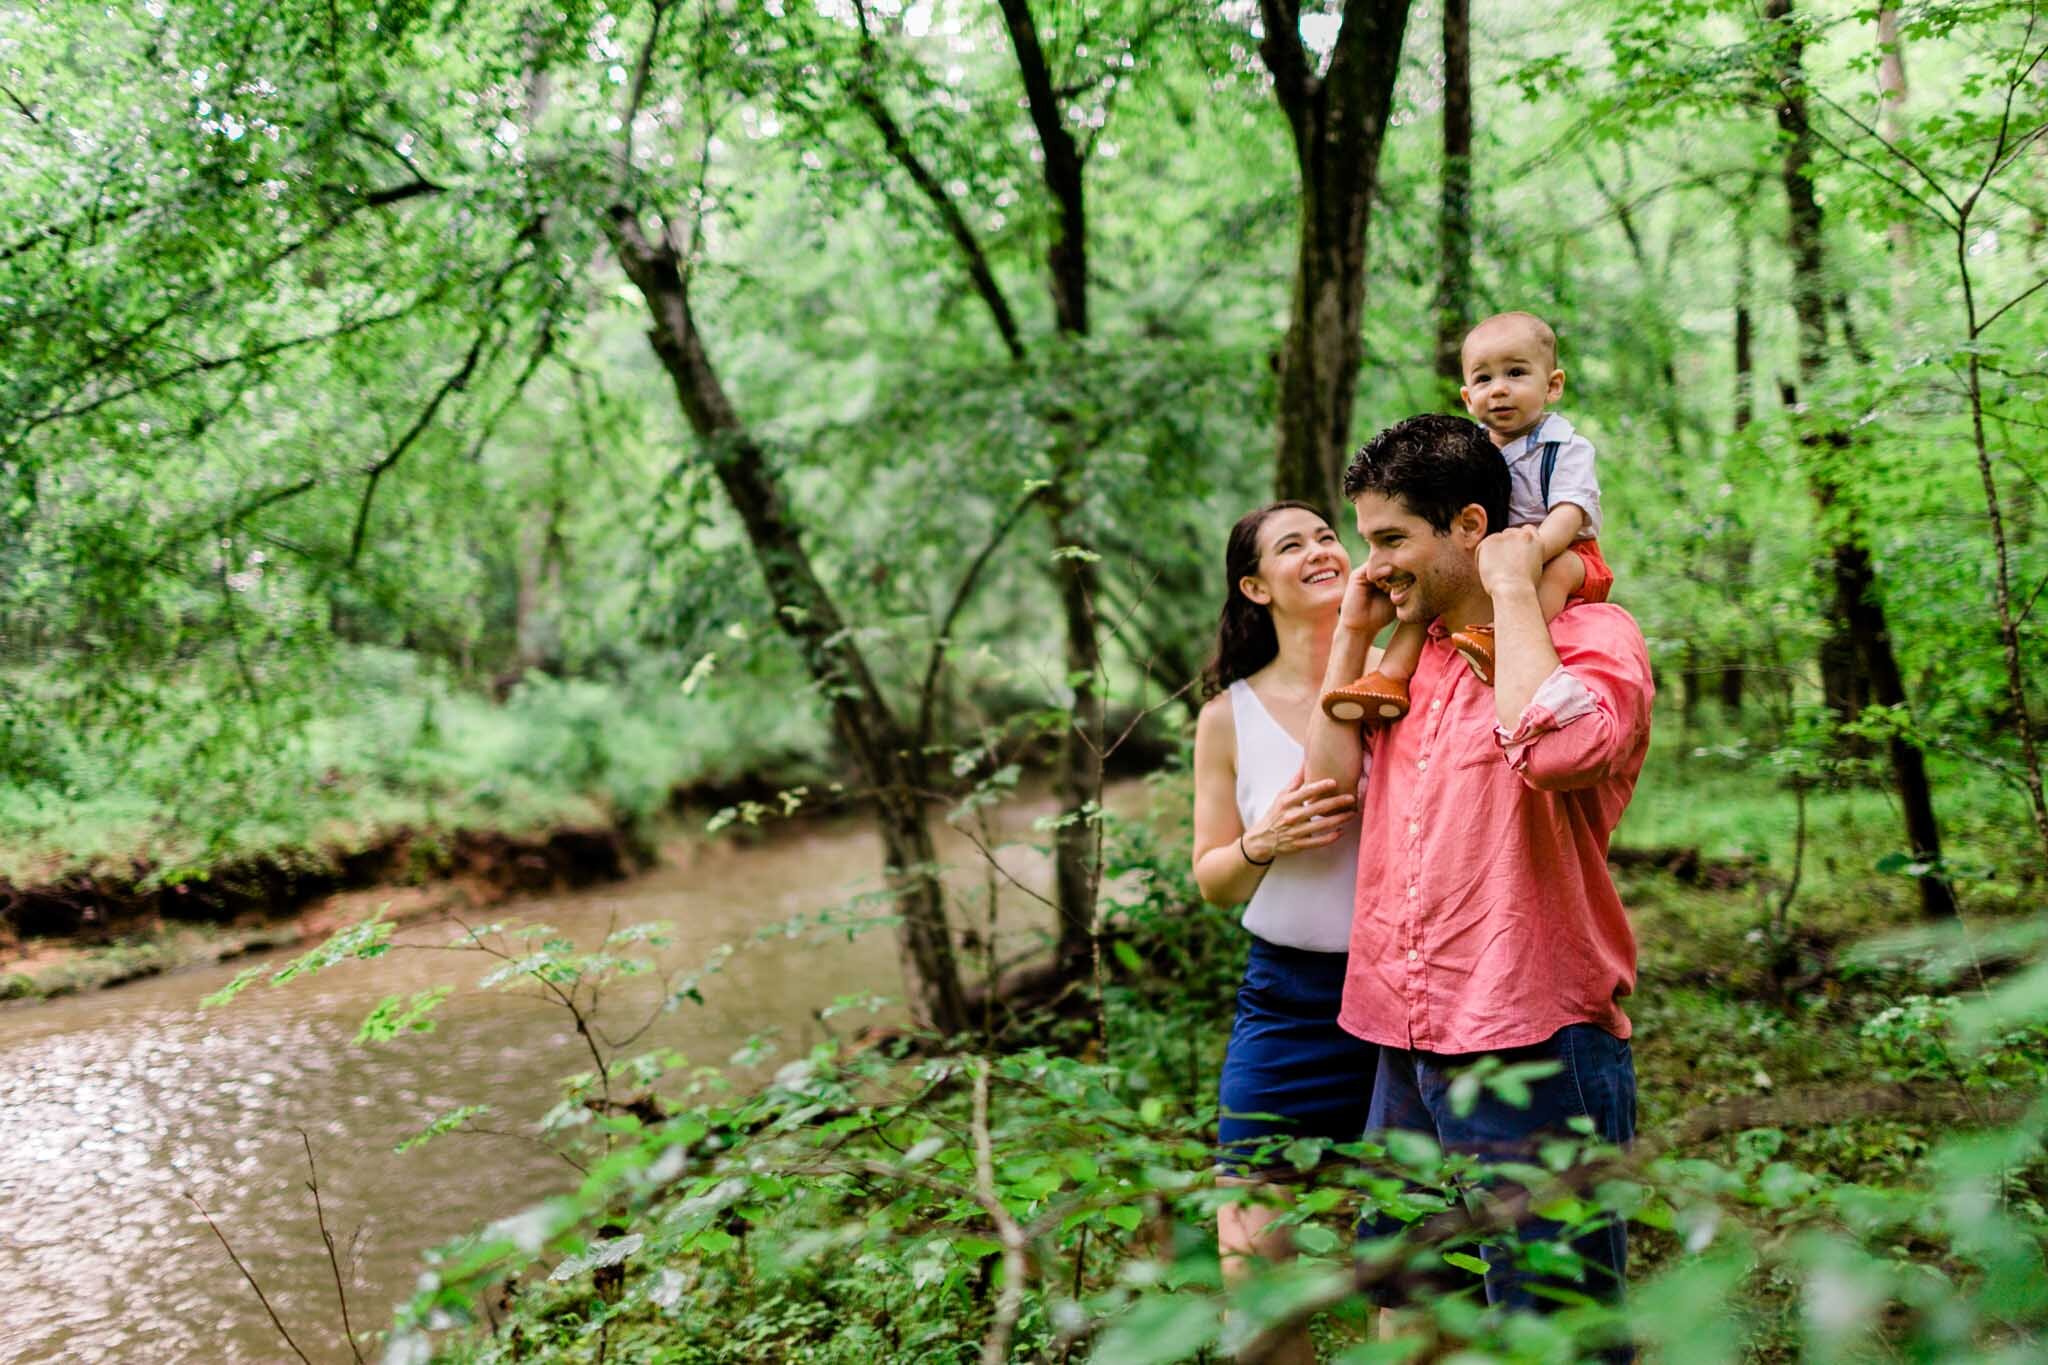 Raleigh Family Photographer | By G. Lin Photography | Family laughing together outside in nature